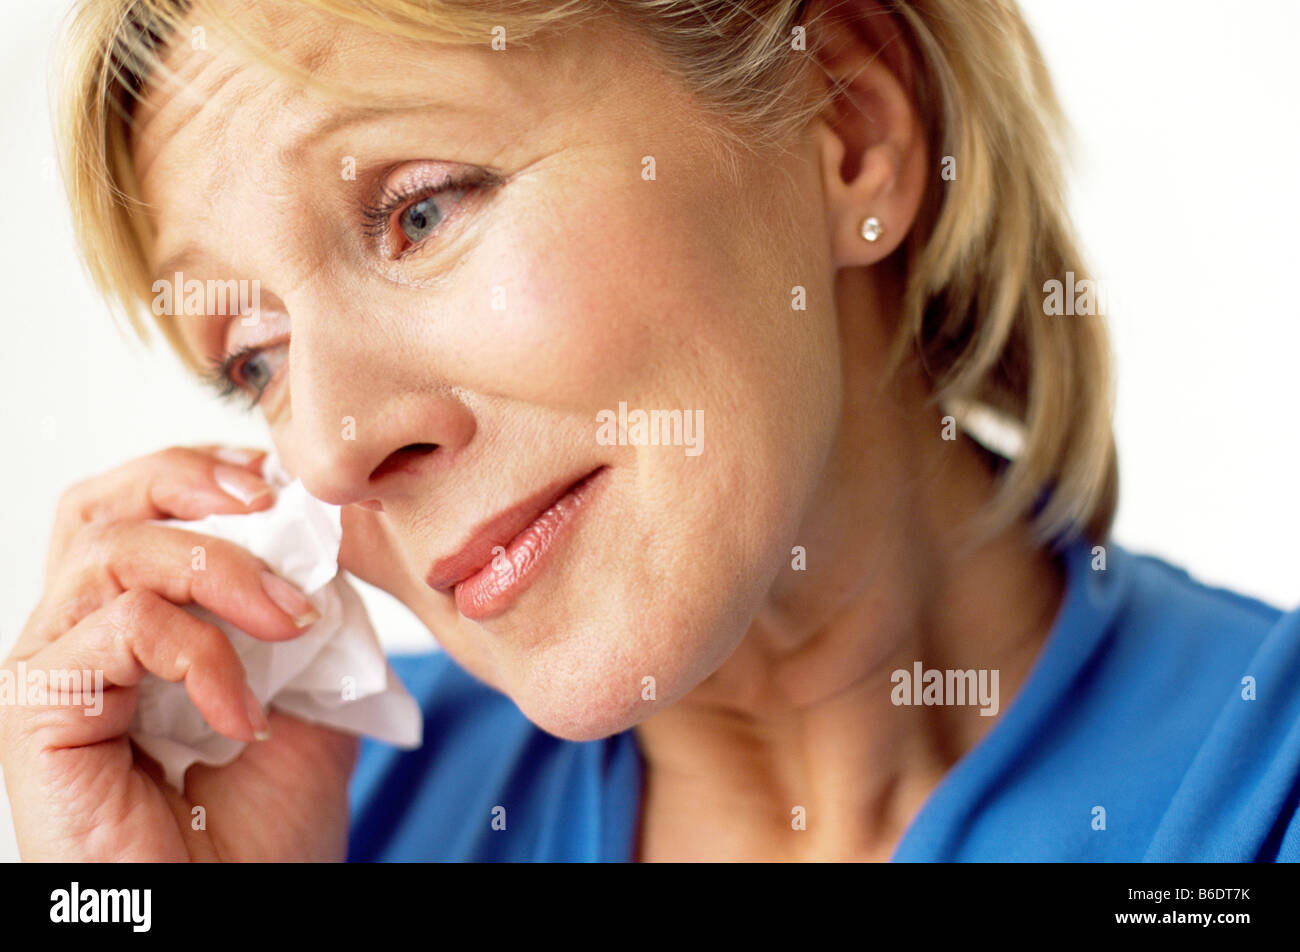 Sad woman, Middle aged woman crying and wiping the tears from her eyes. Stock Photo